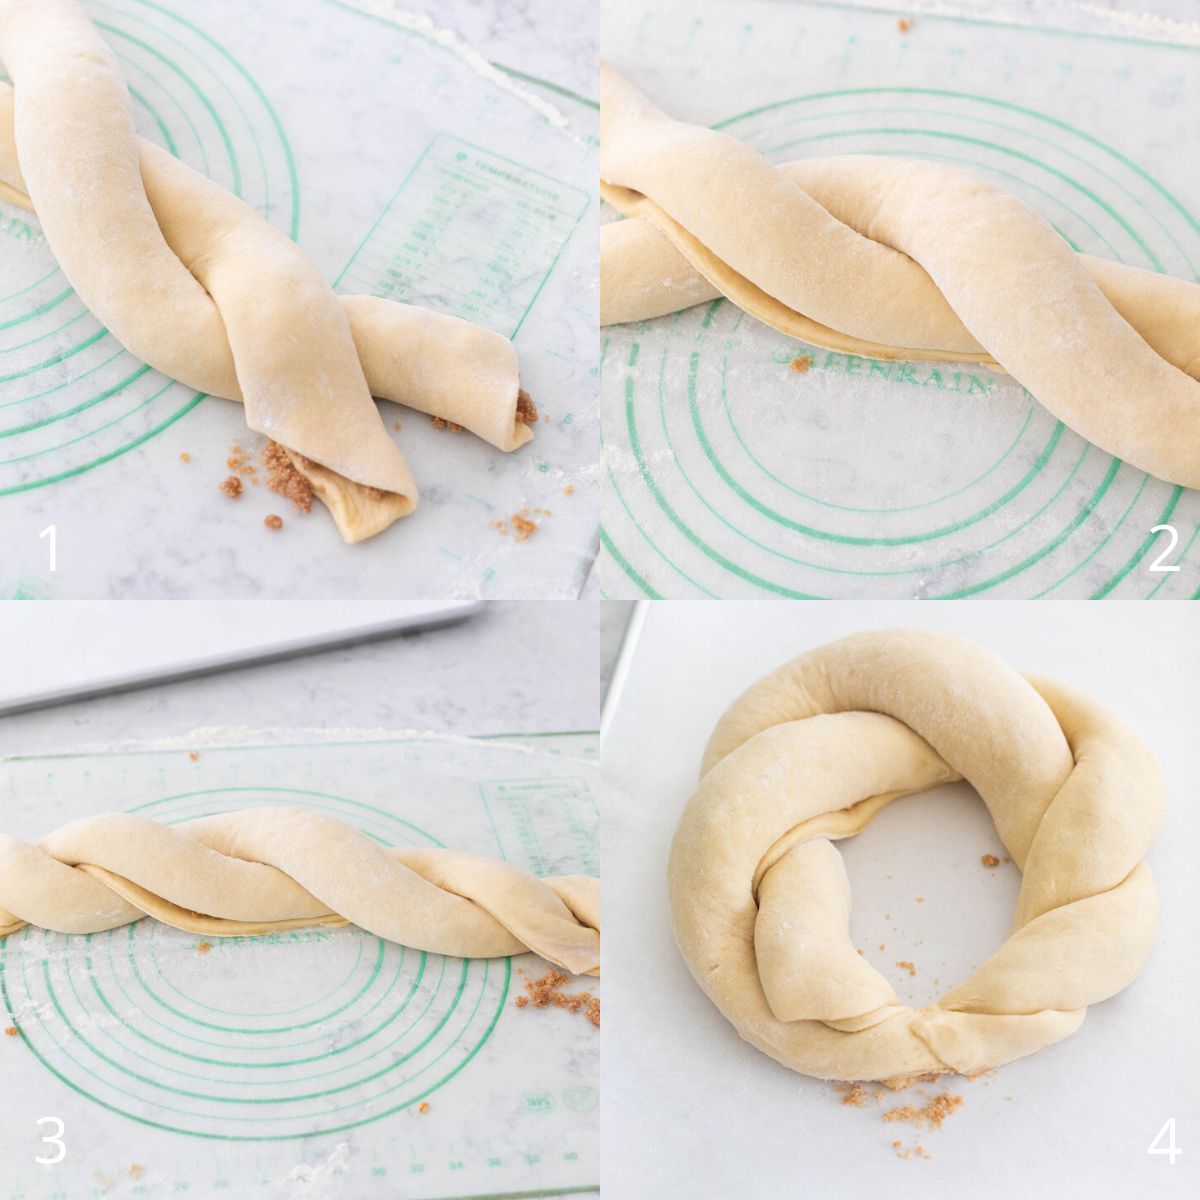 The step by step photos show how to braid the king cake and form the circle.